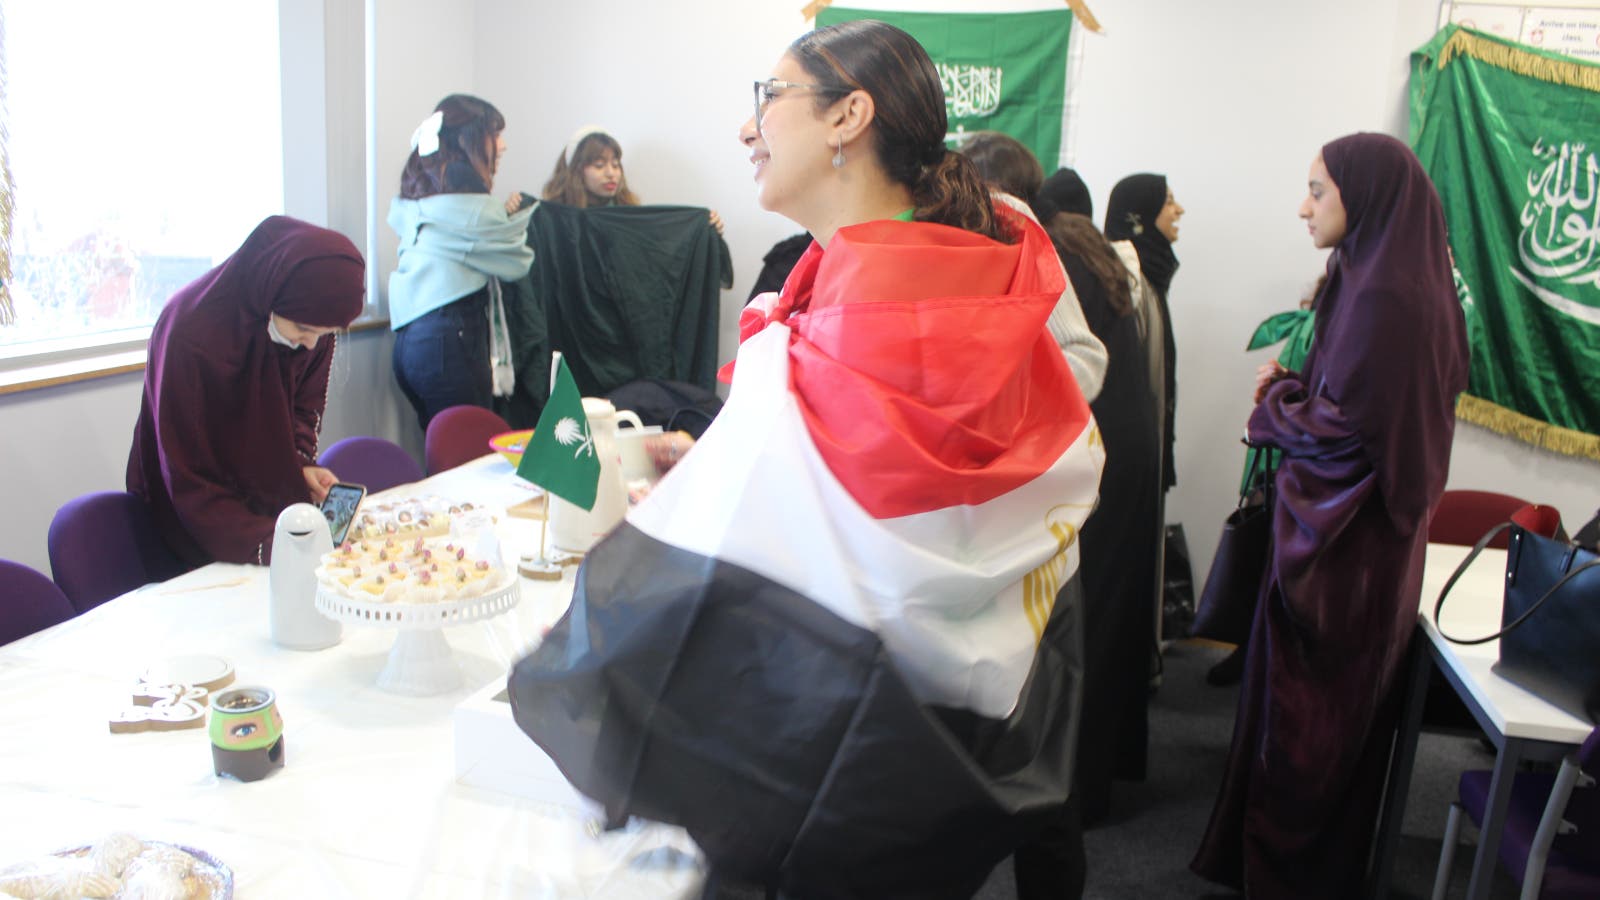 A student wrapped in a flag in front of a table with food.